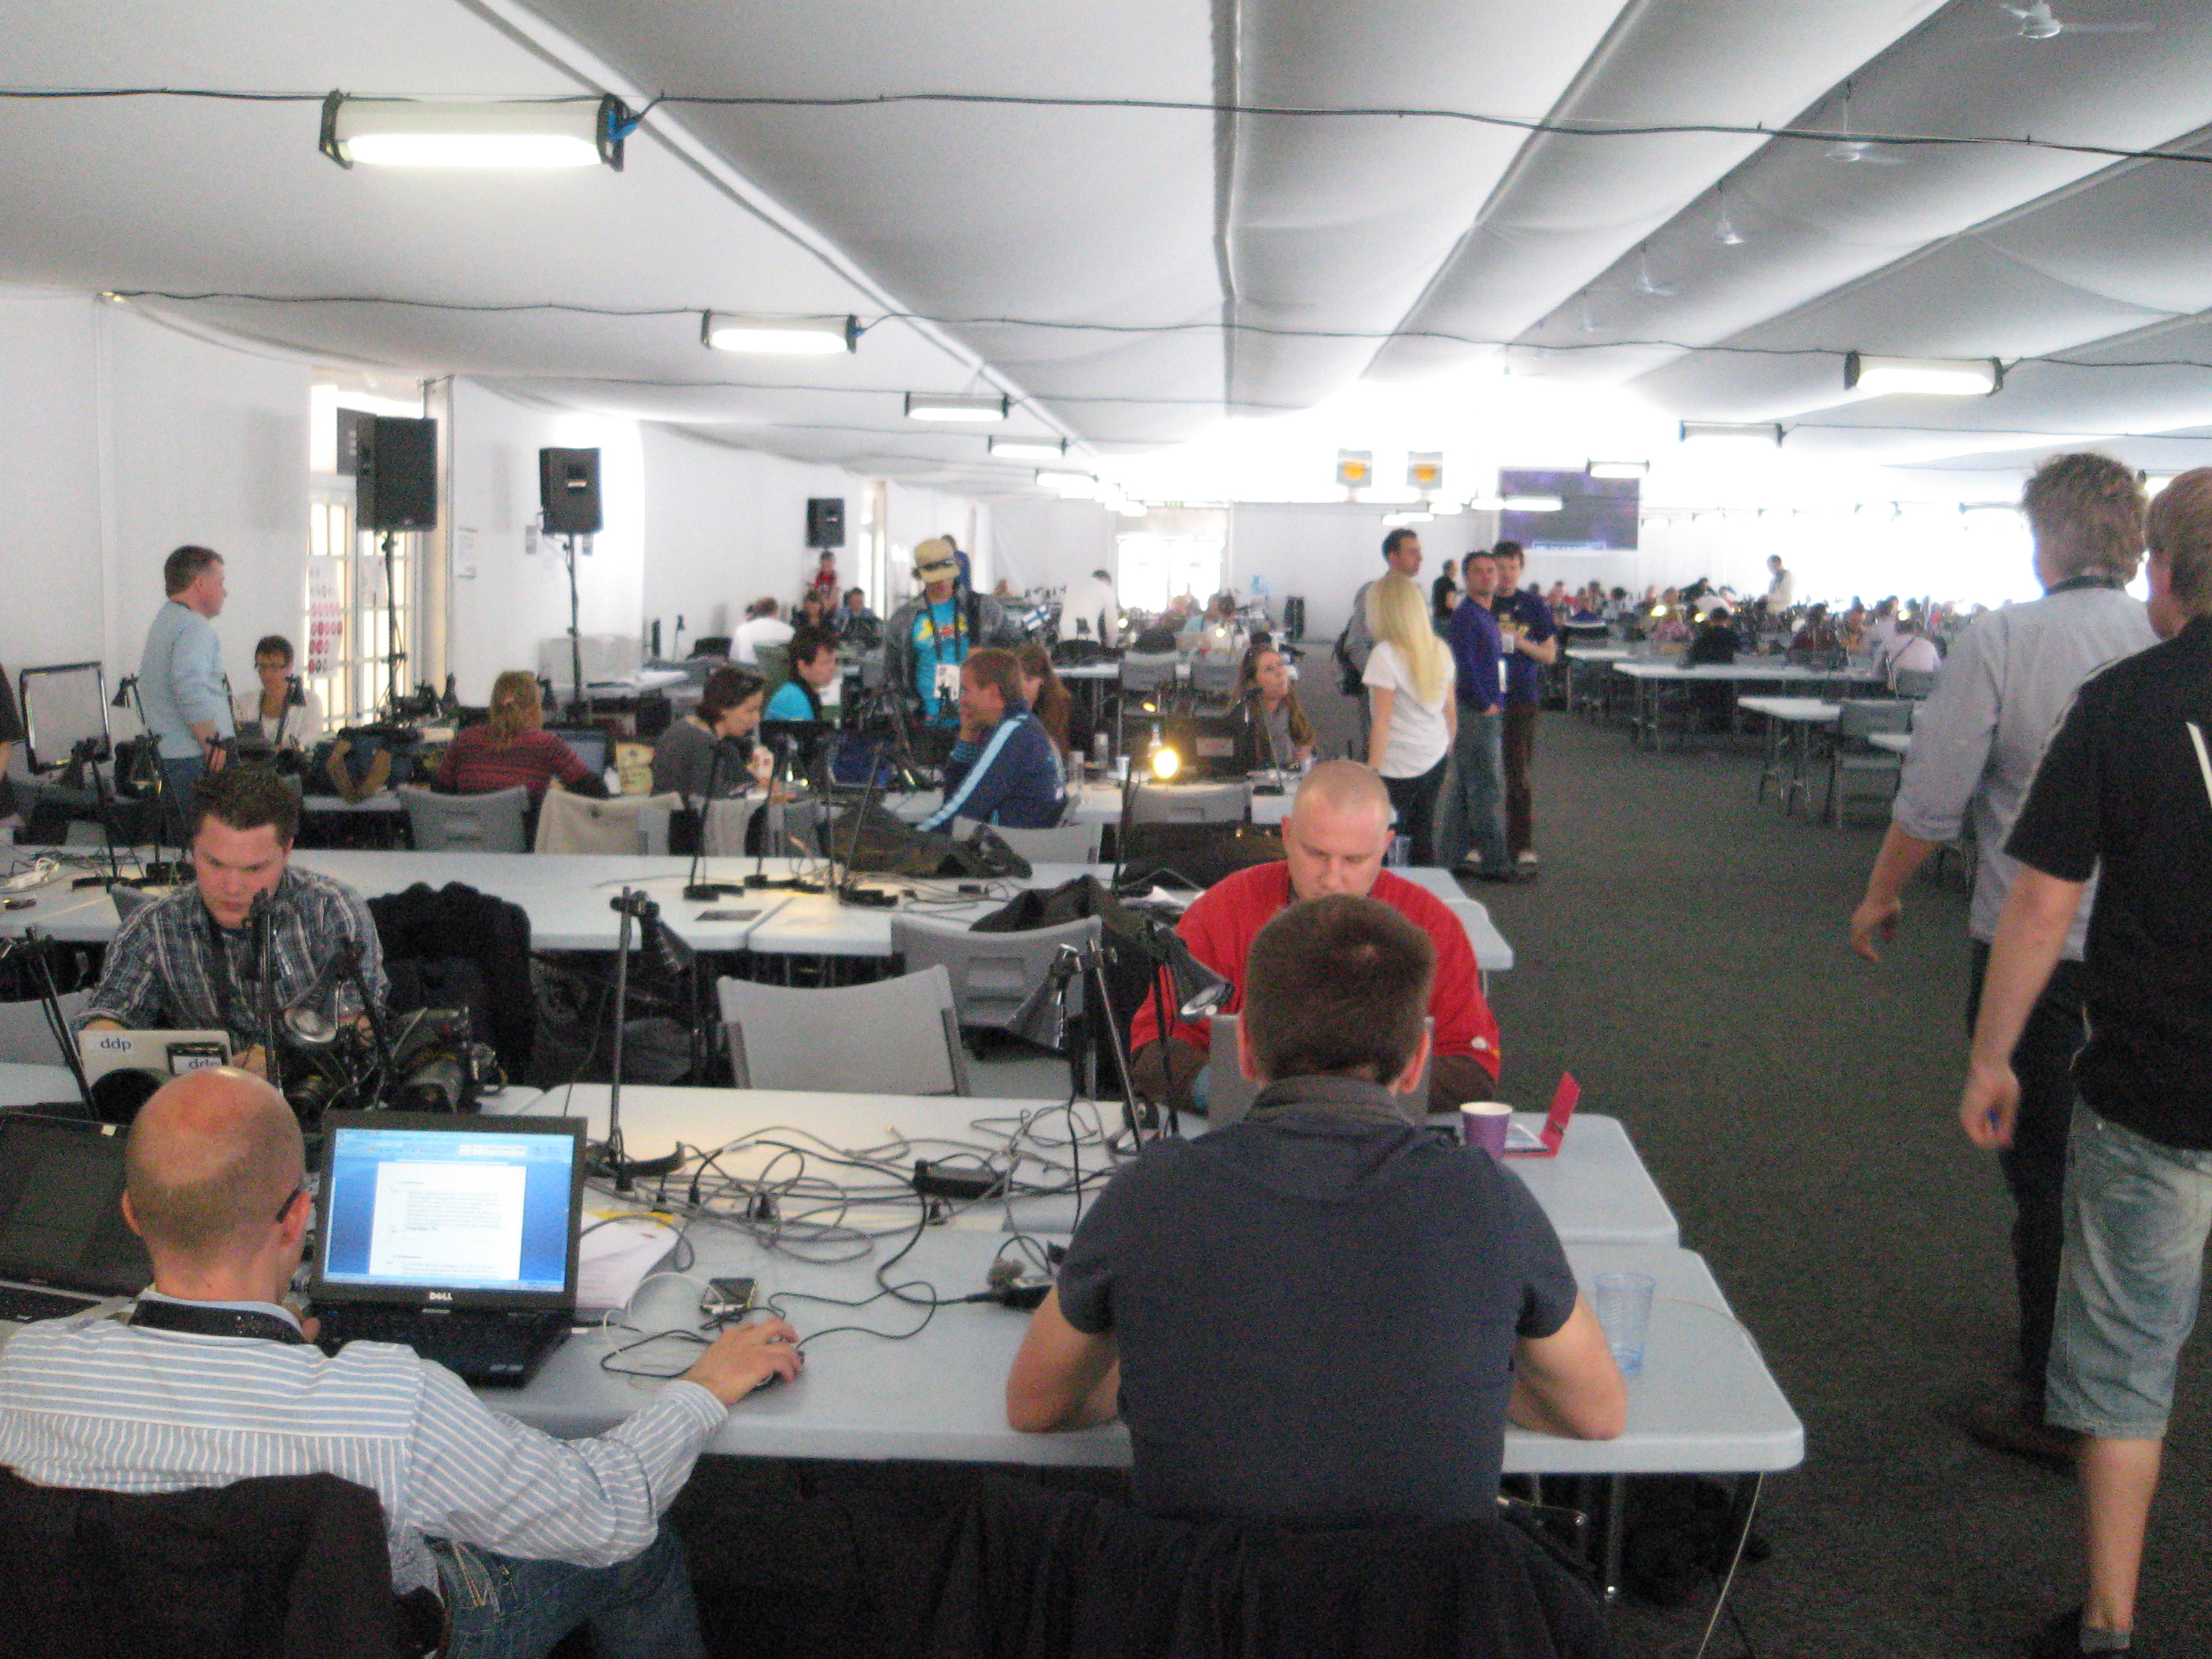 The crammed press area at Eurovision